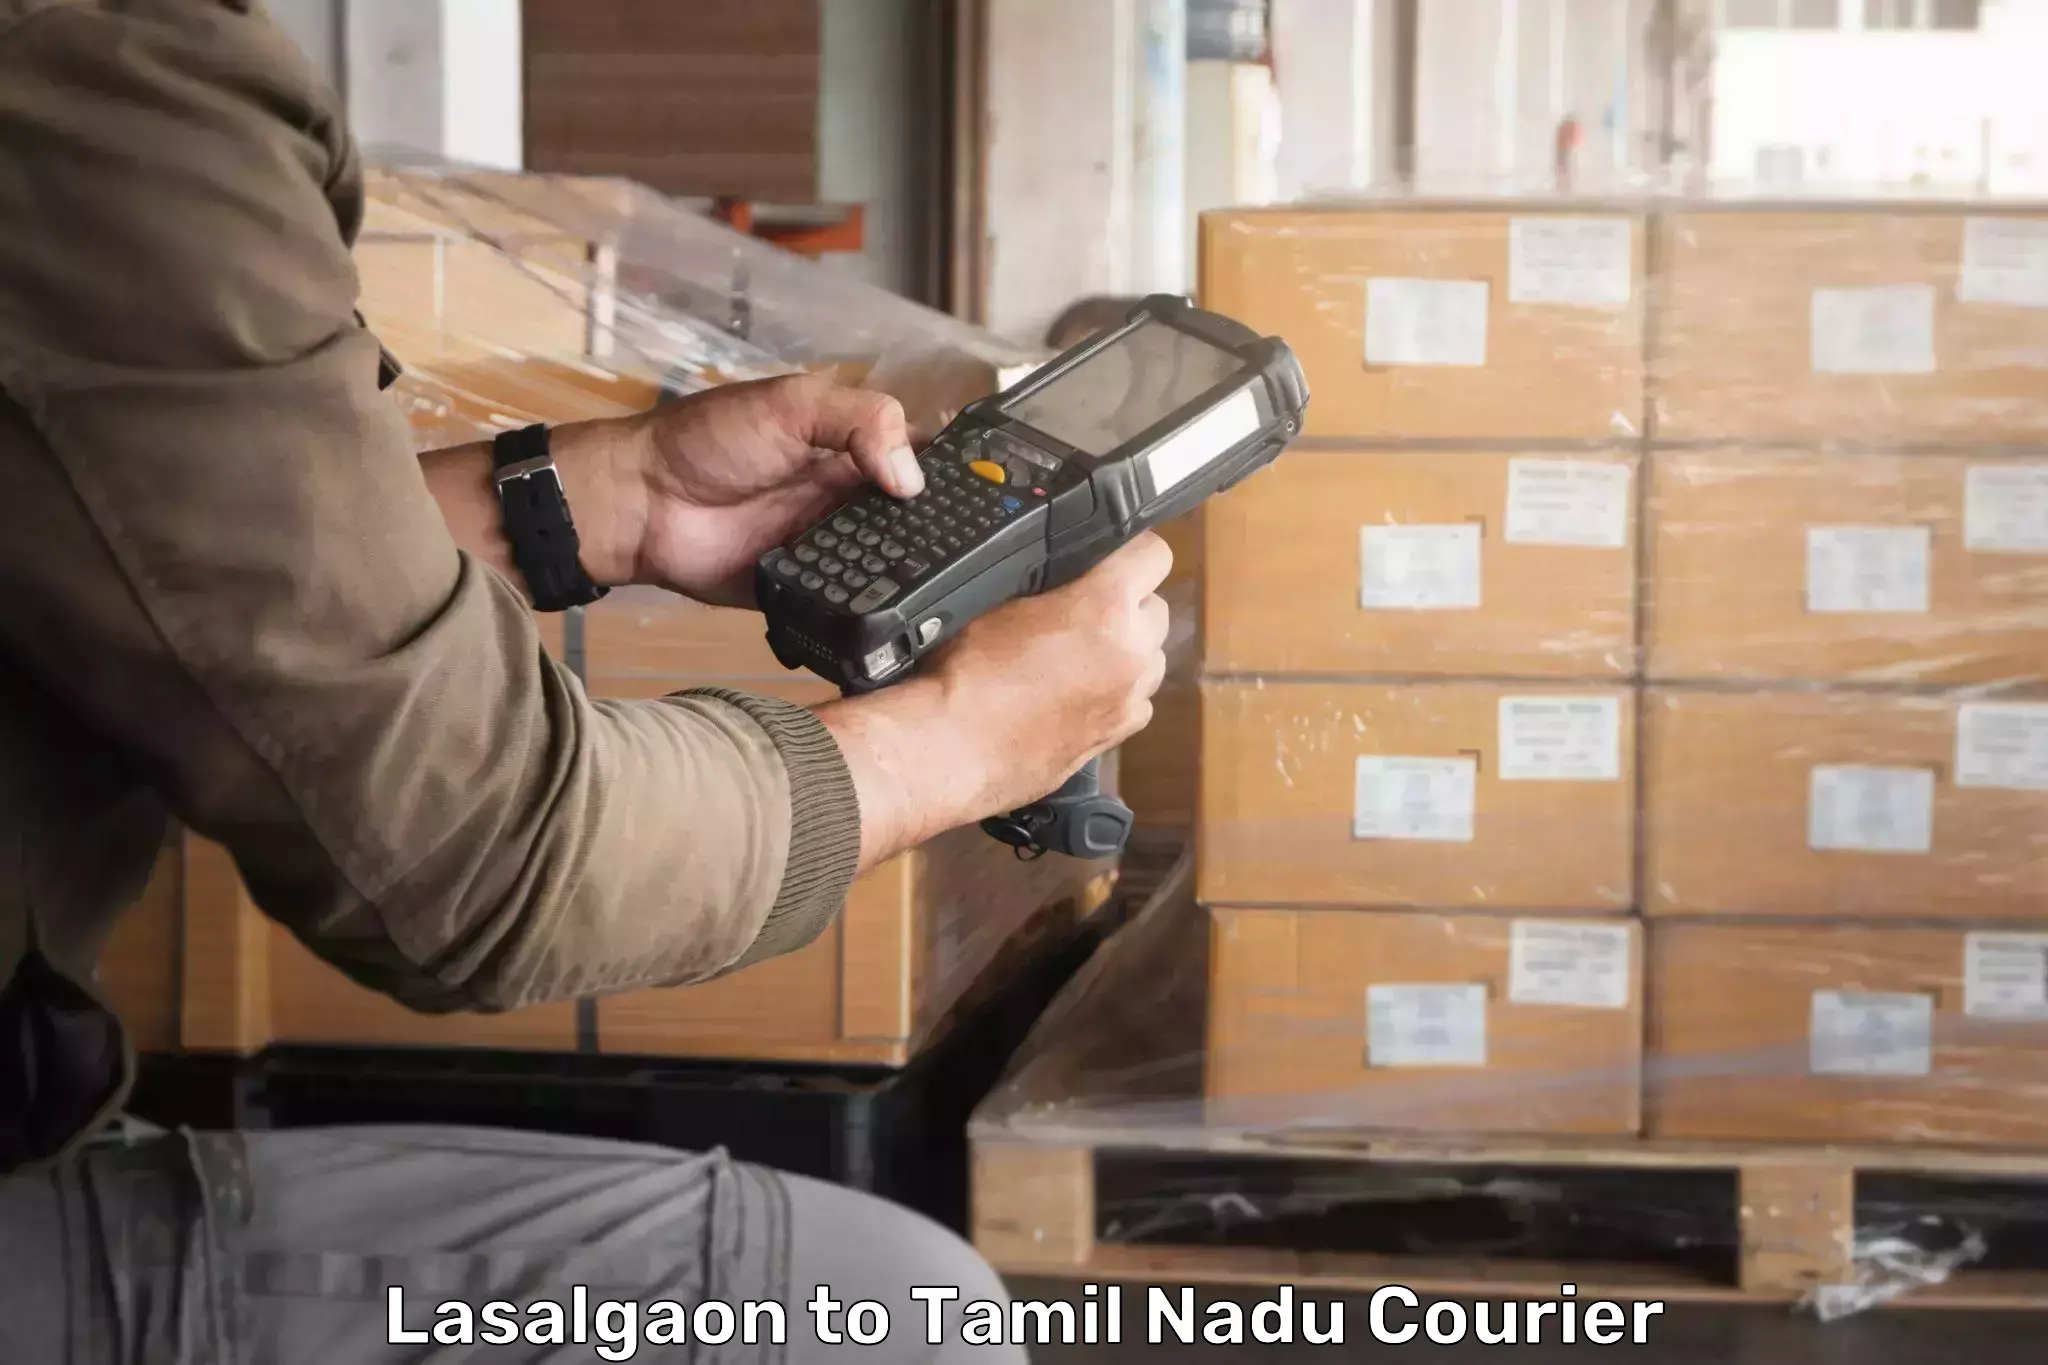 Global courier networks Lasalgaon to Trichy